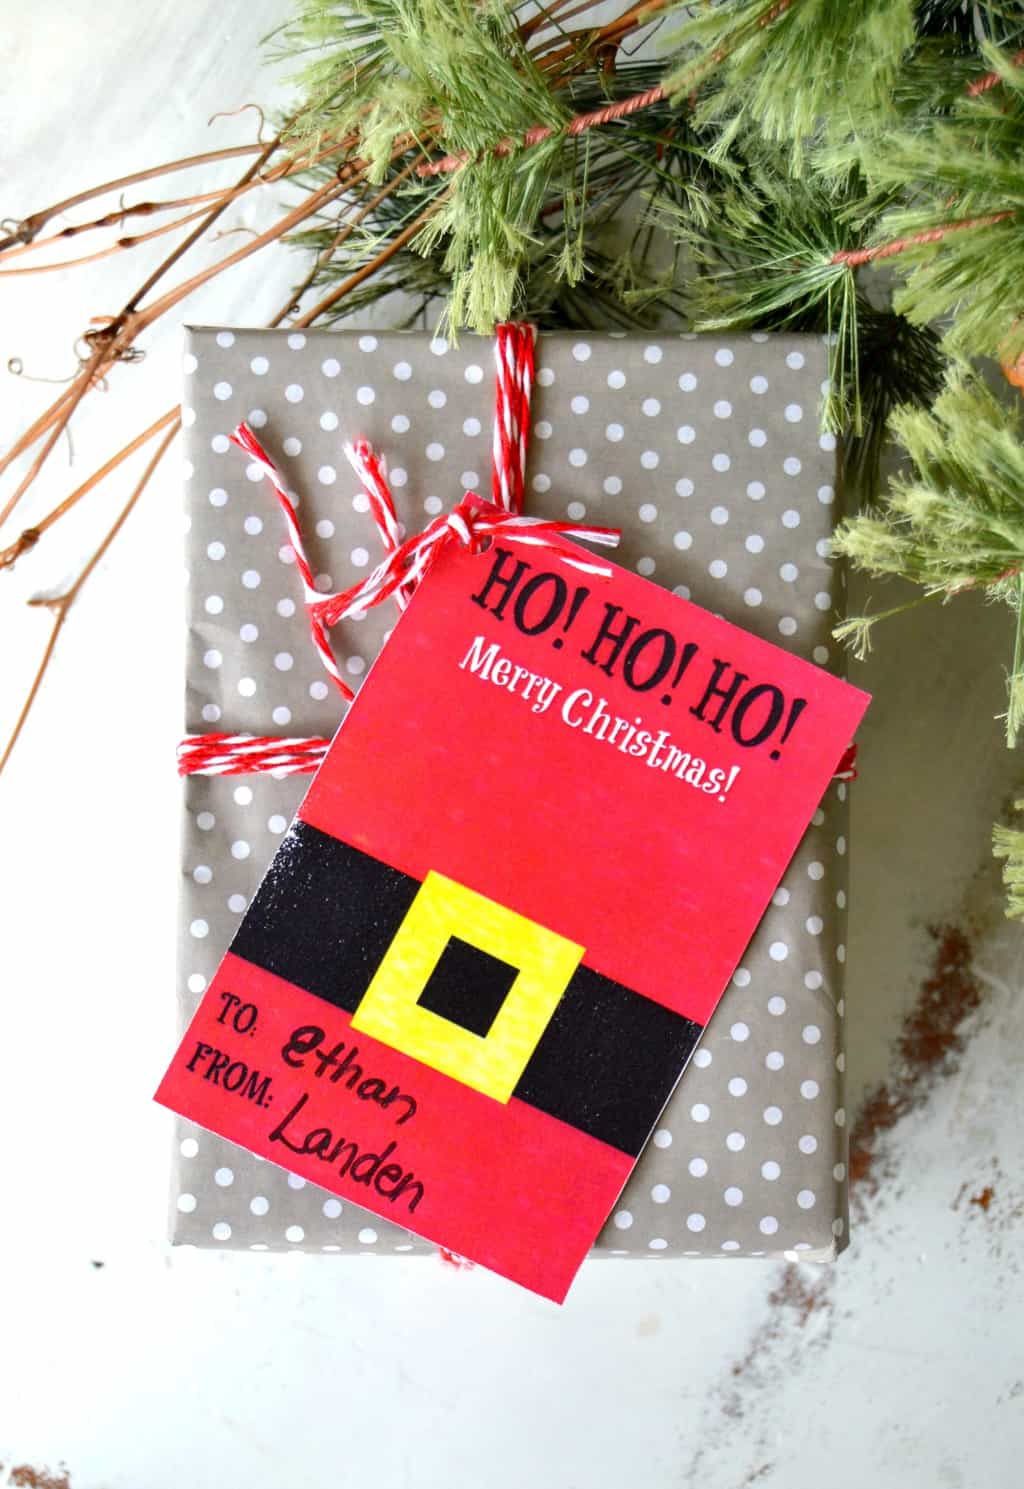 FREE Printable Christmas Gift Tags That Will Add Personality To